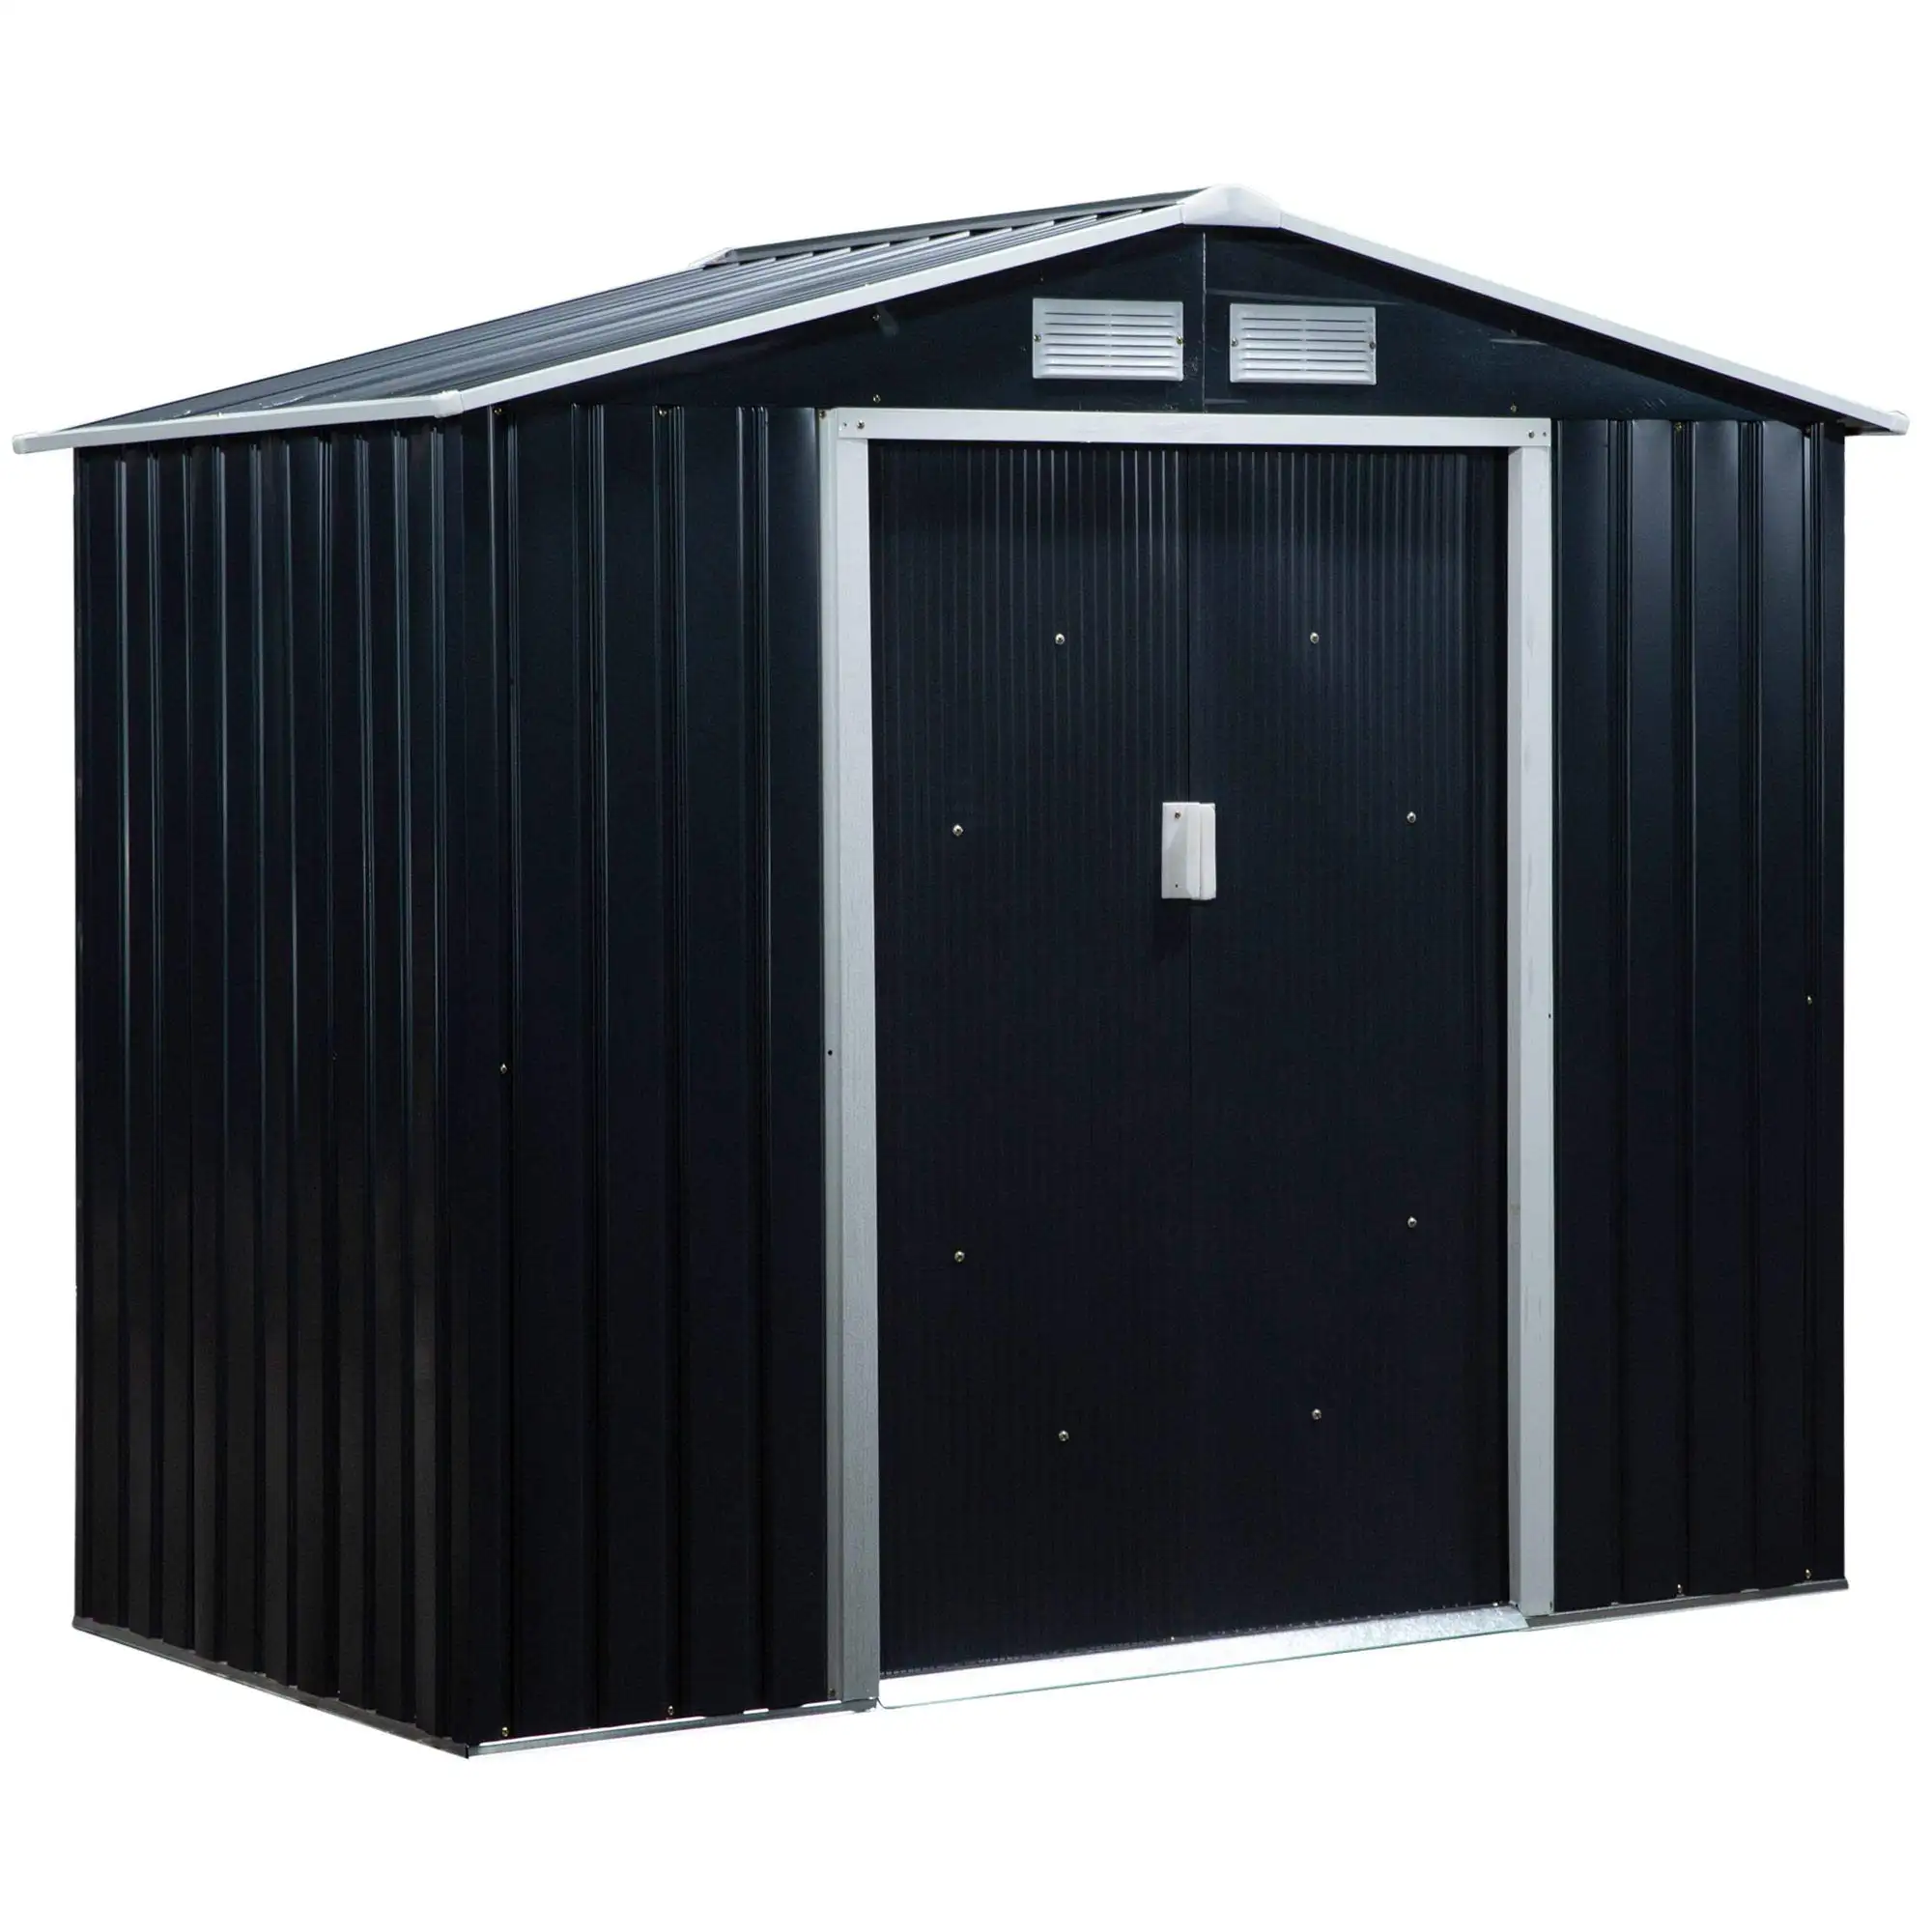 Large Metal Tool Sheds Heavy Duty Storage House Outdoor Storage Shed steel Garden Tool Sheds for Backyard Garden Patio